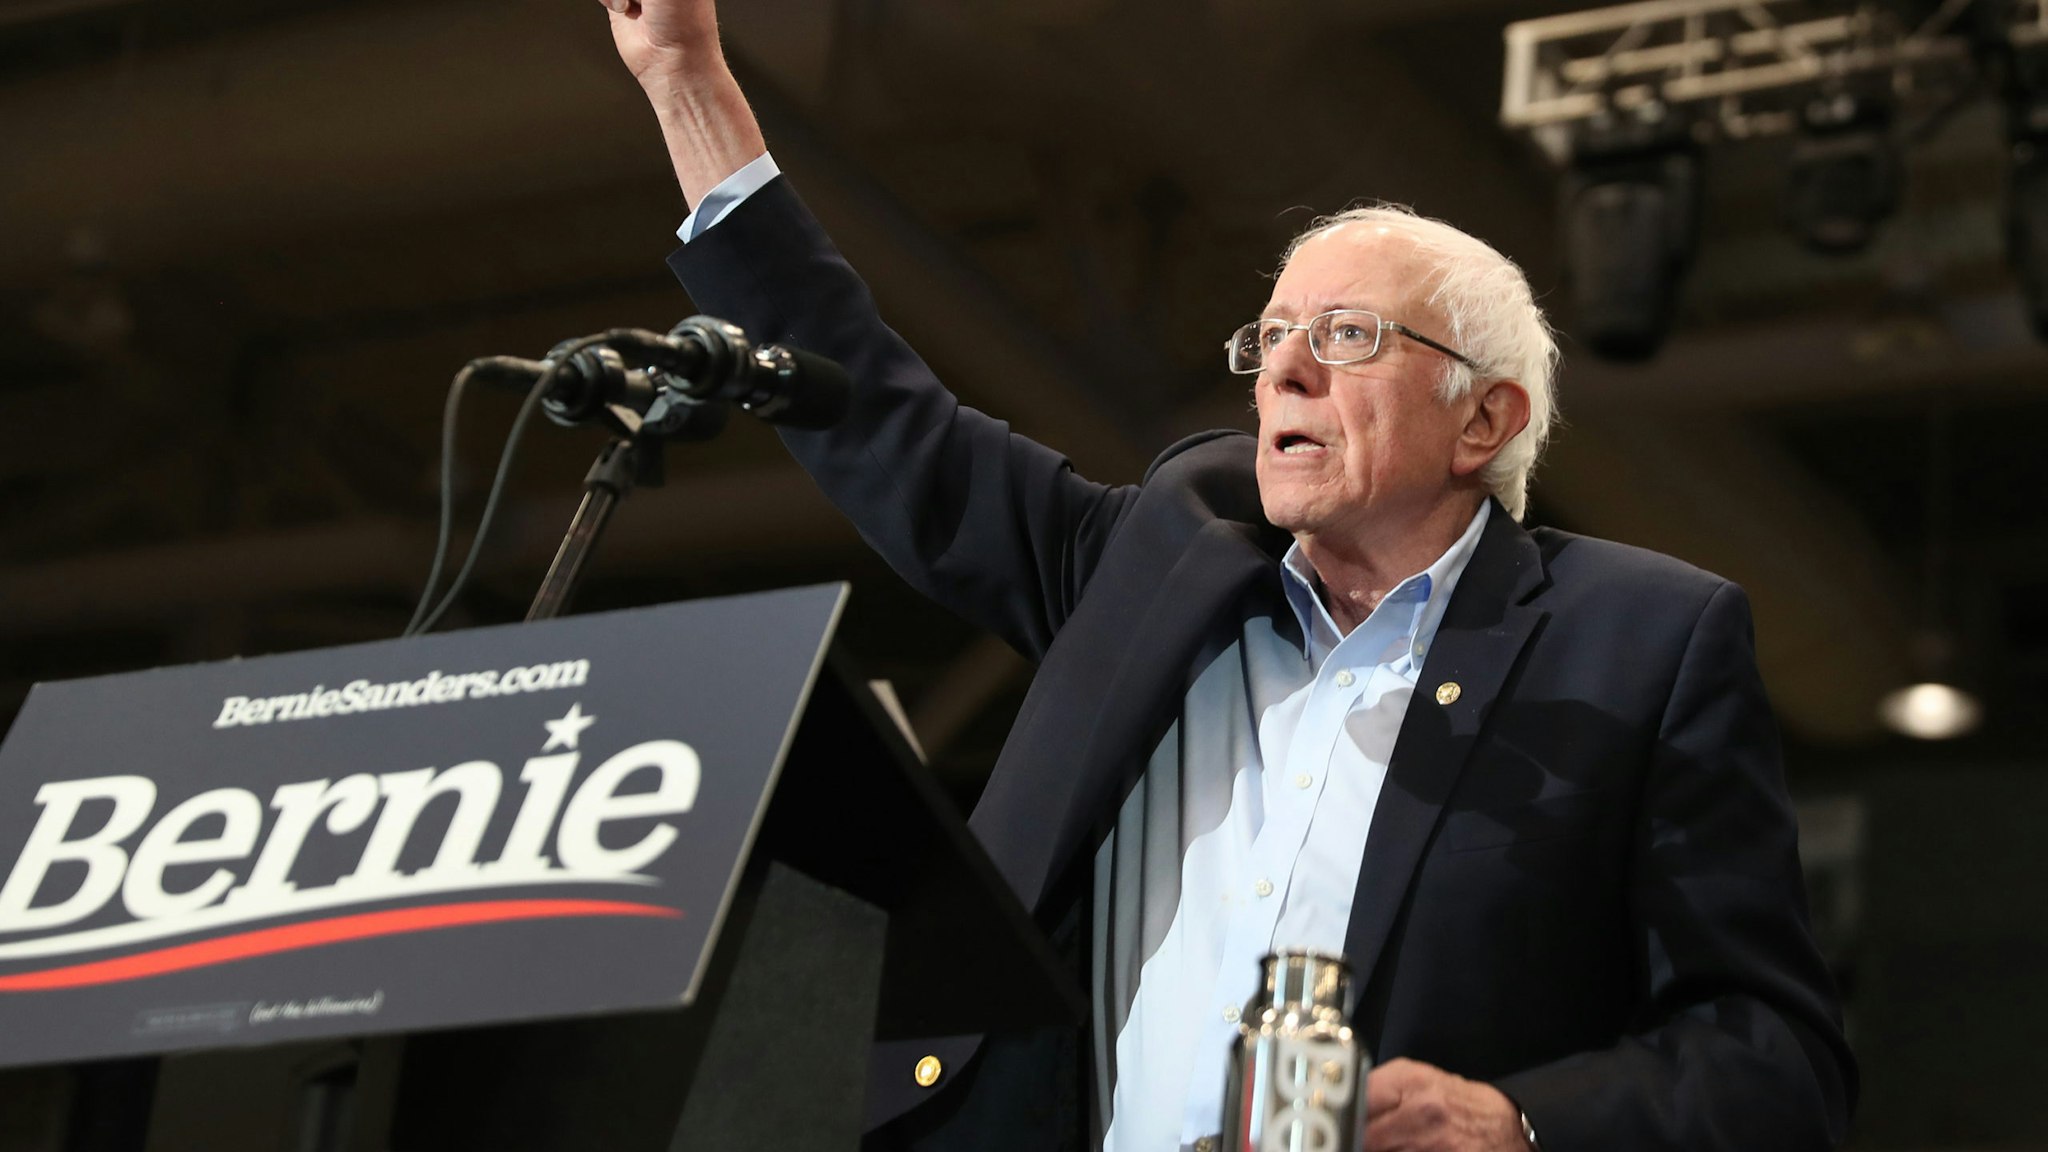 DURHAM, NEW HAMPSHIRE - FEBRUARY 10: Democratic presidential candidate Sen. Bernie Sanders (I-VT) speaks during a campaign event at the Whittemore Center Arena on February 10, 2020 in Durham, New Hampshire. The state's Democratic primary is tomorrow. (Photo by Joe Raedle/Getty Images)